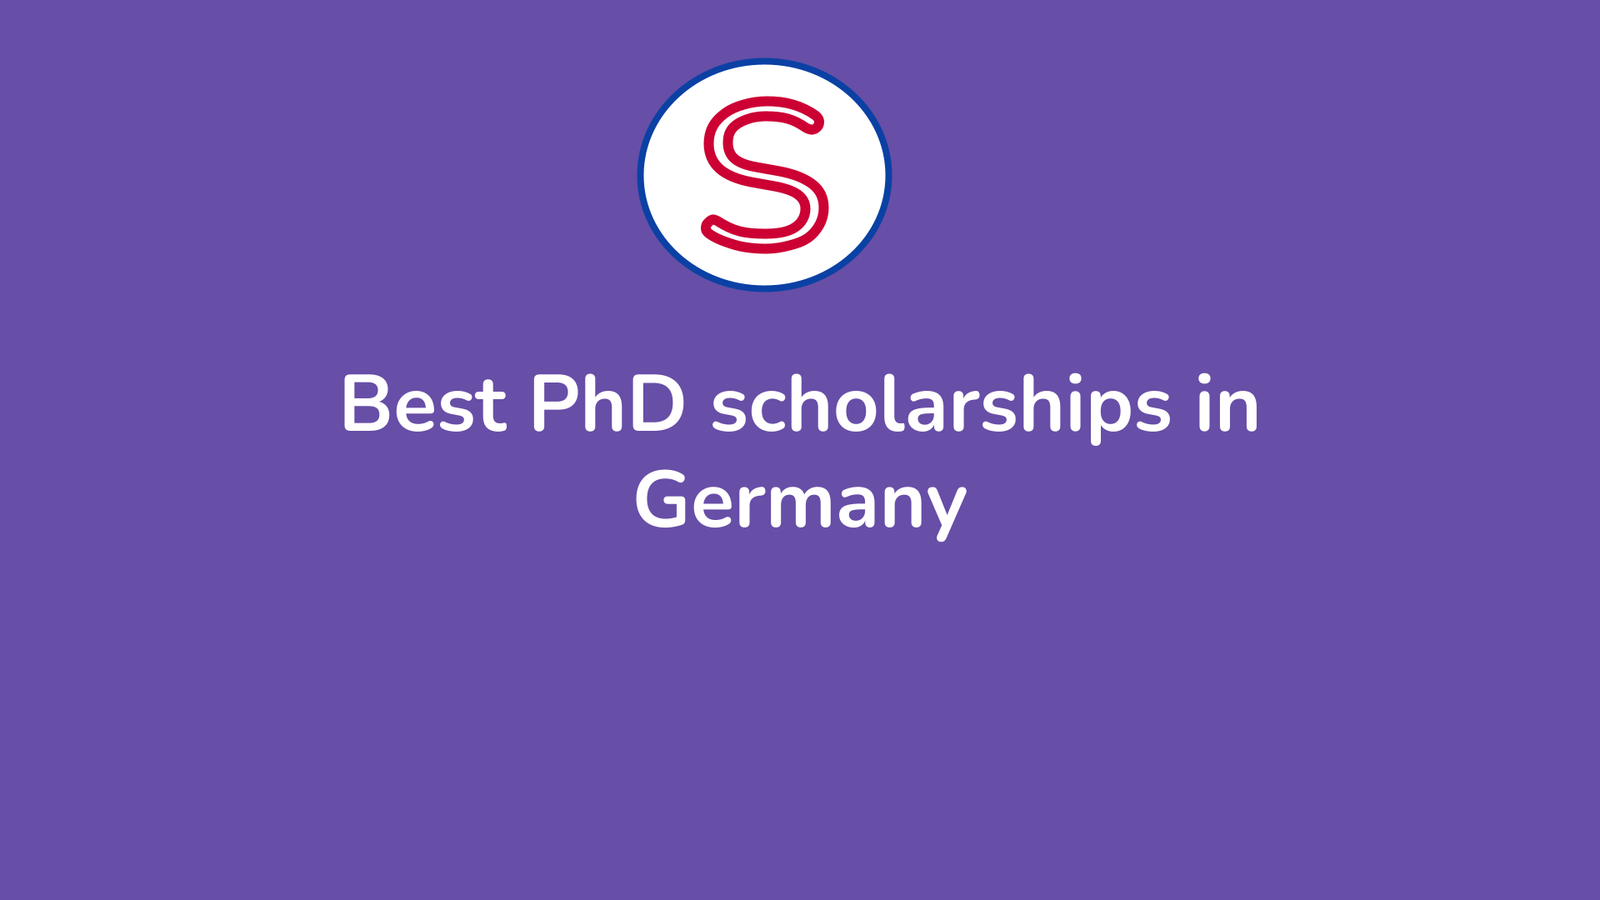 phd fees in germany for international students